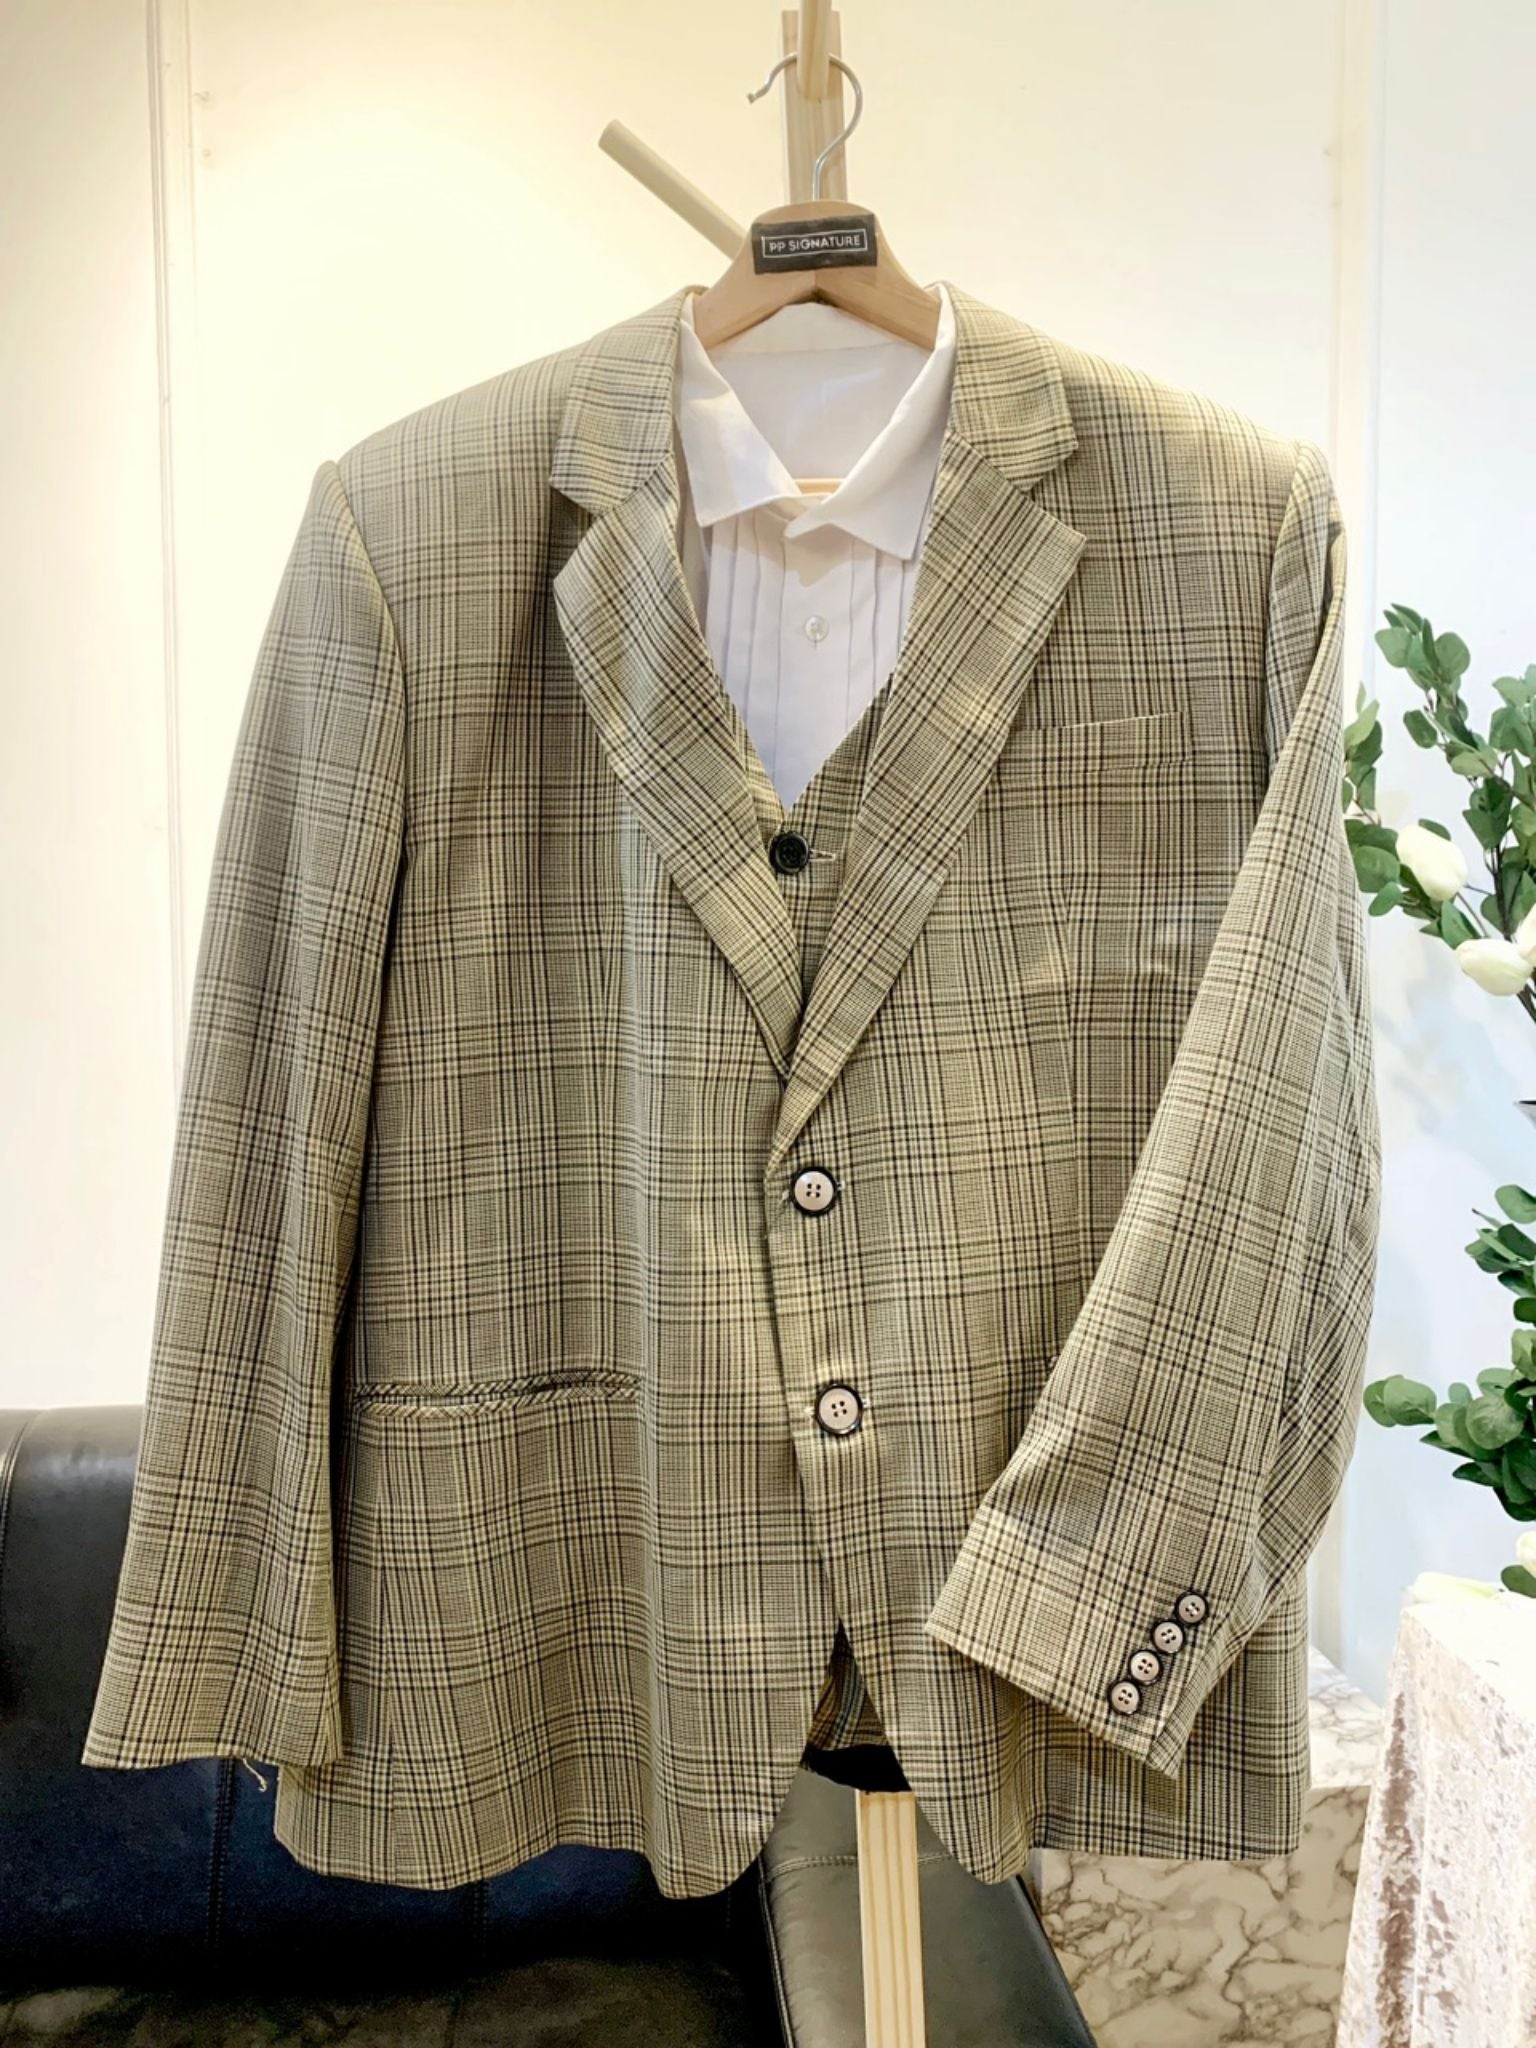 Redefine wedding elegance with our Light Brown Checked 3 Piece Suit. A perfect fusion of style and charm that's sure to leave a lasting impression.